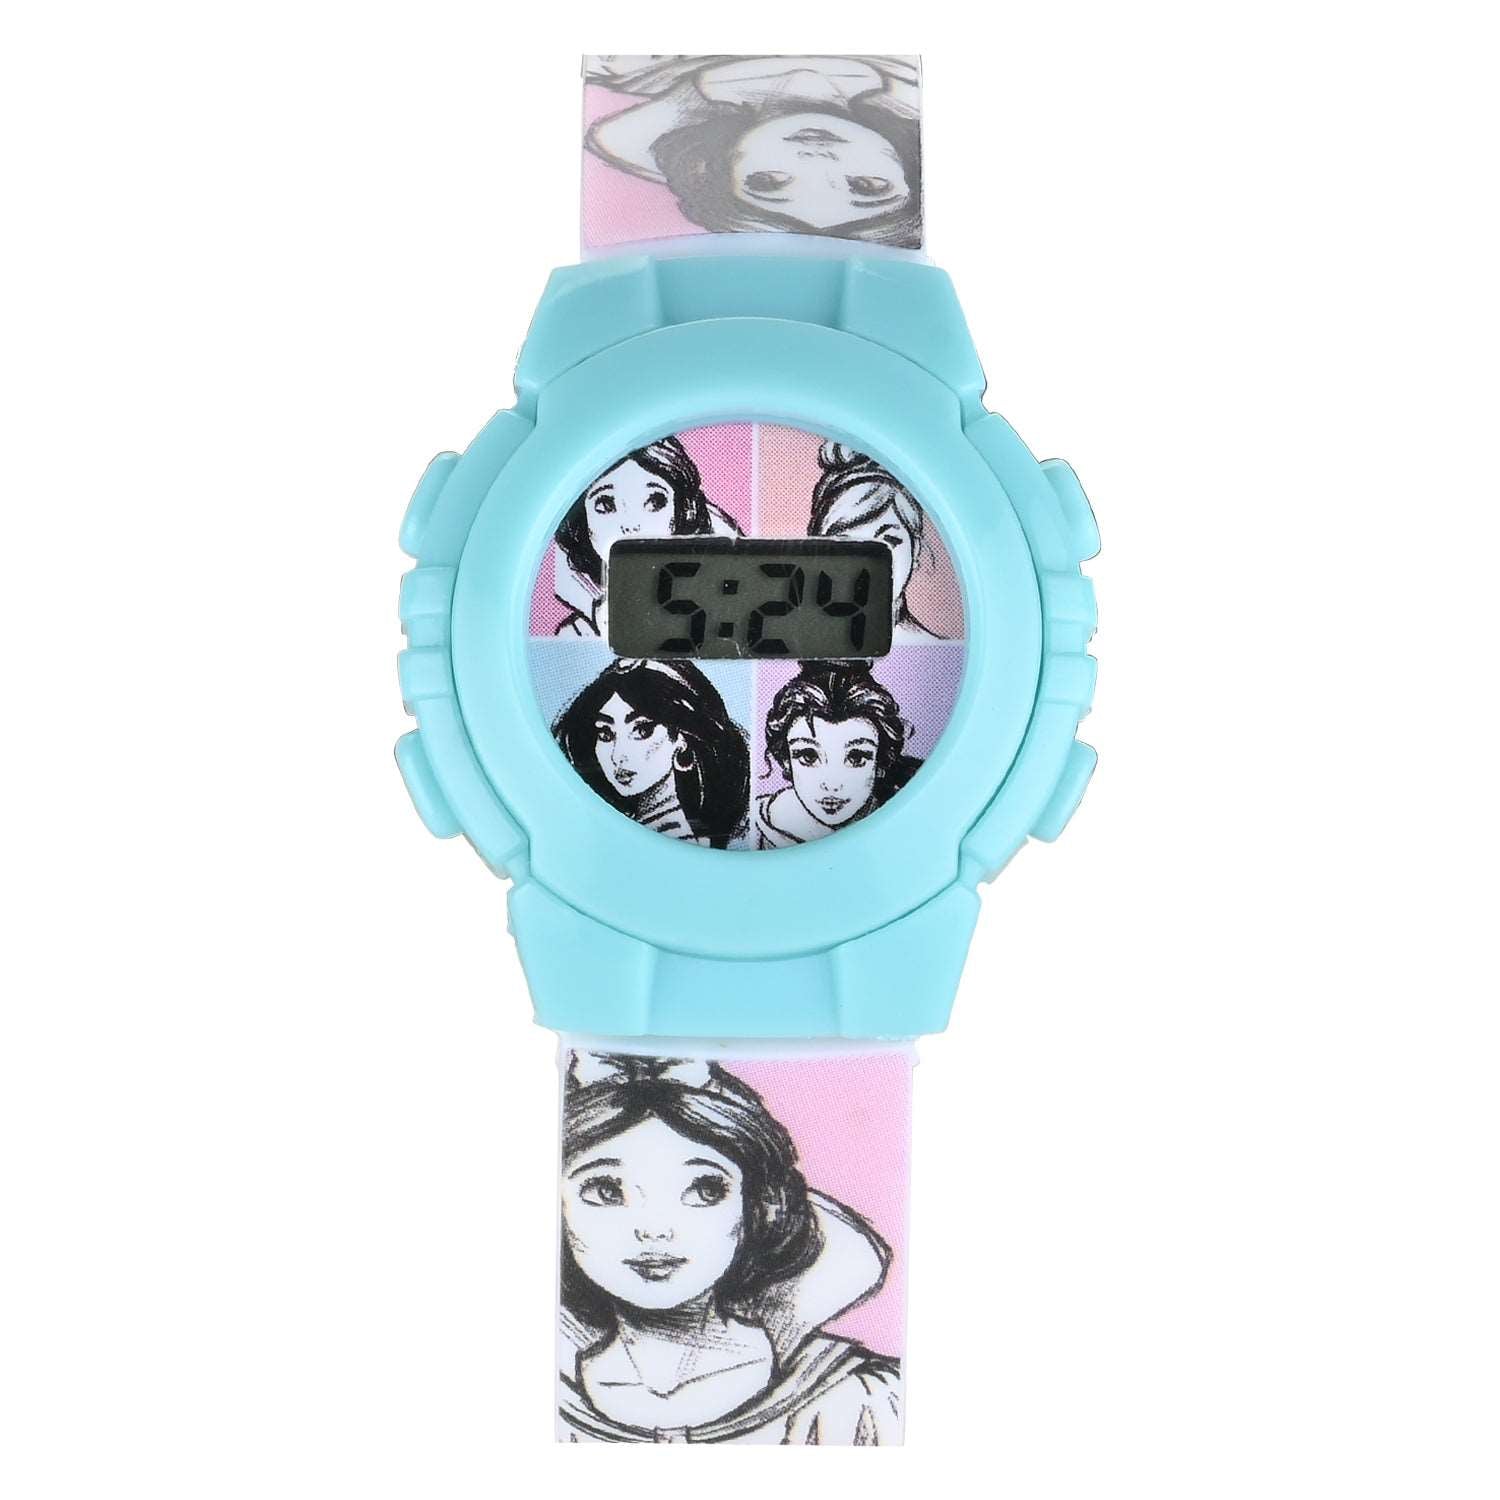 Disney Princess Basic Digital Watches - Toys4All.in